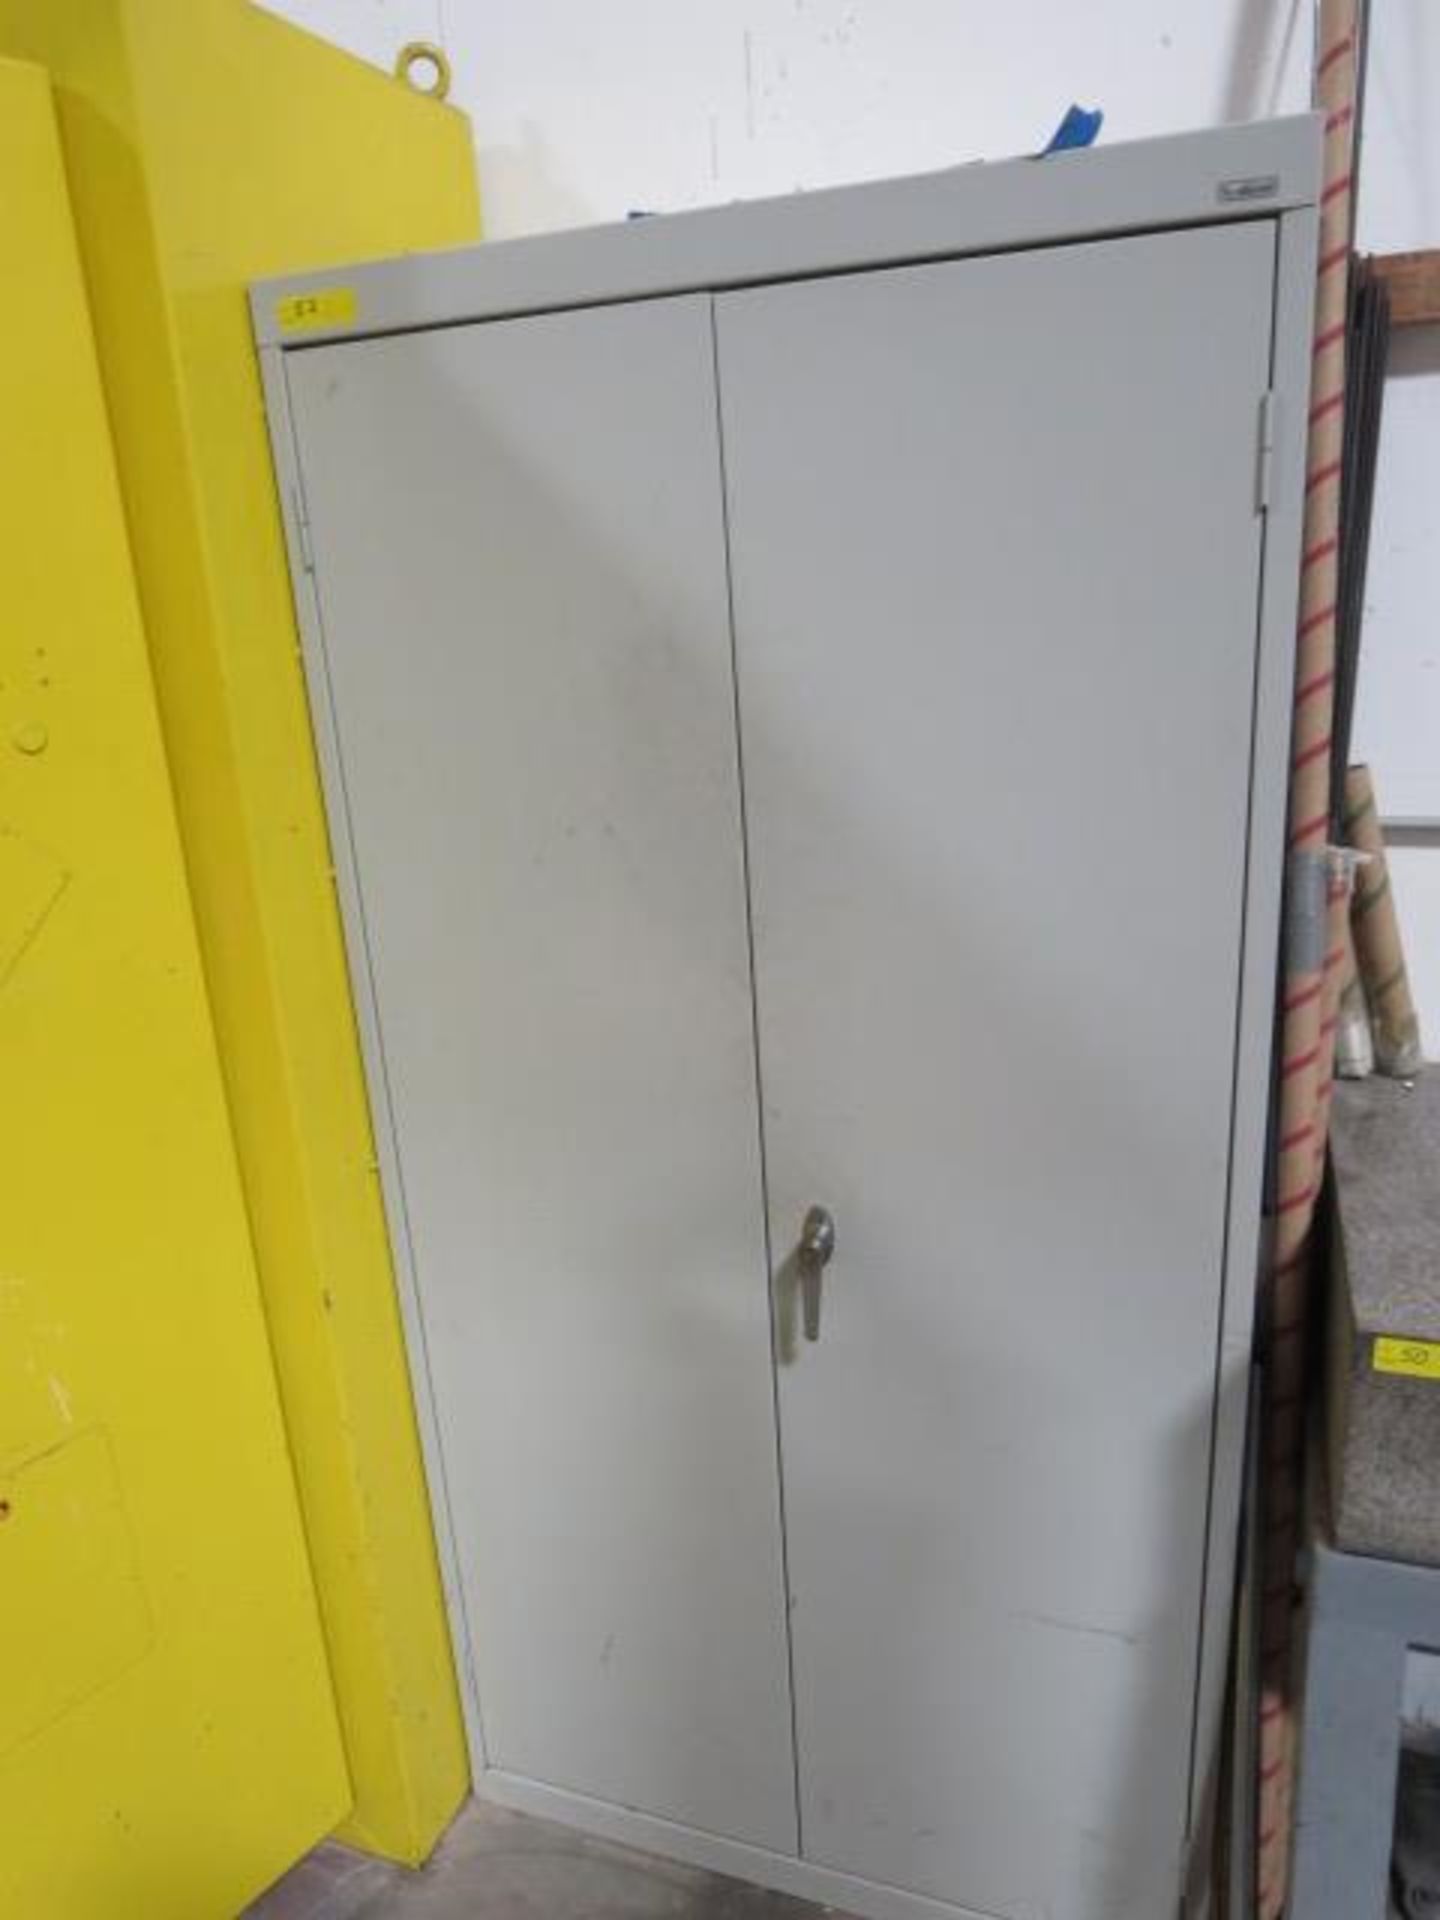 2 Door Metal Storage Cabinet, Includes Contents Consisting of Assorted Cleaning Products and